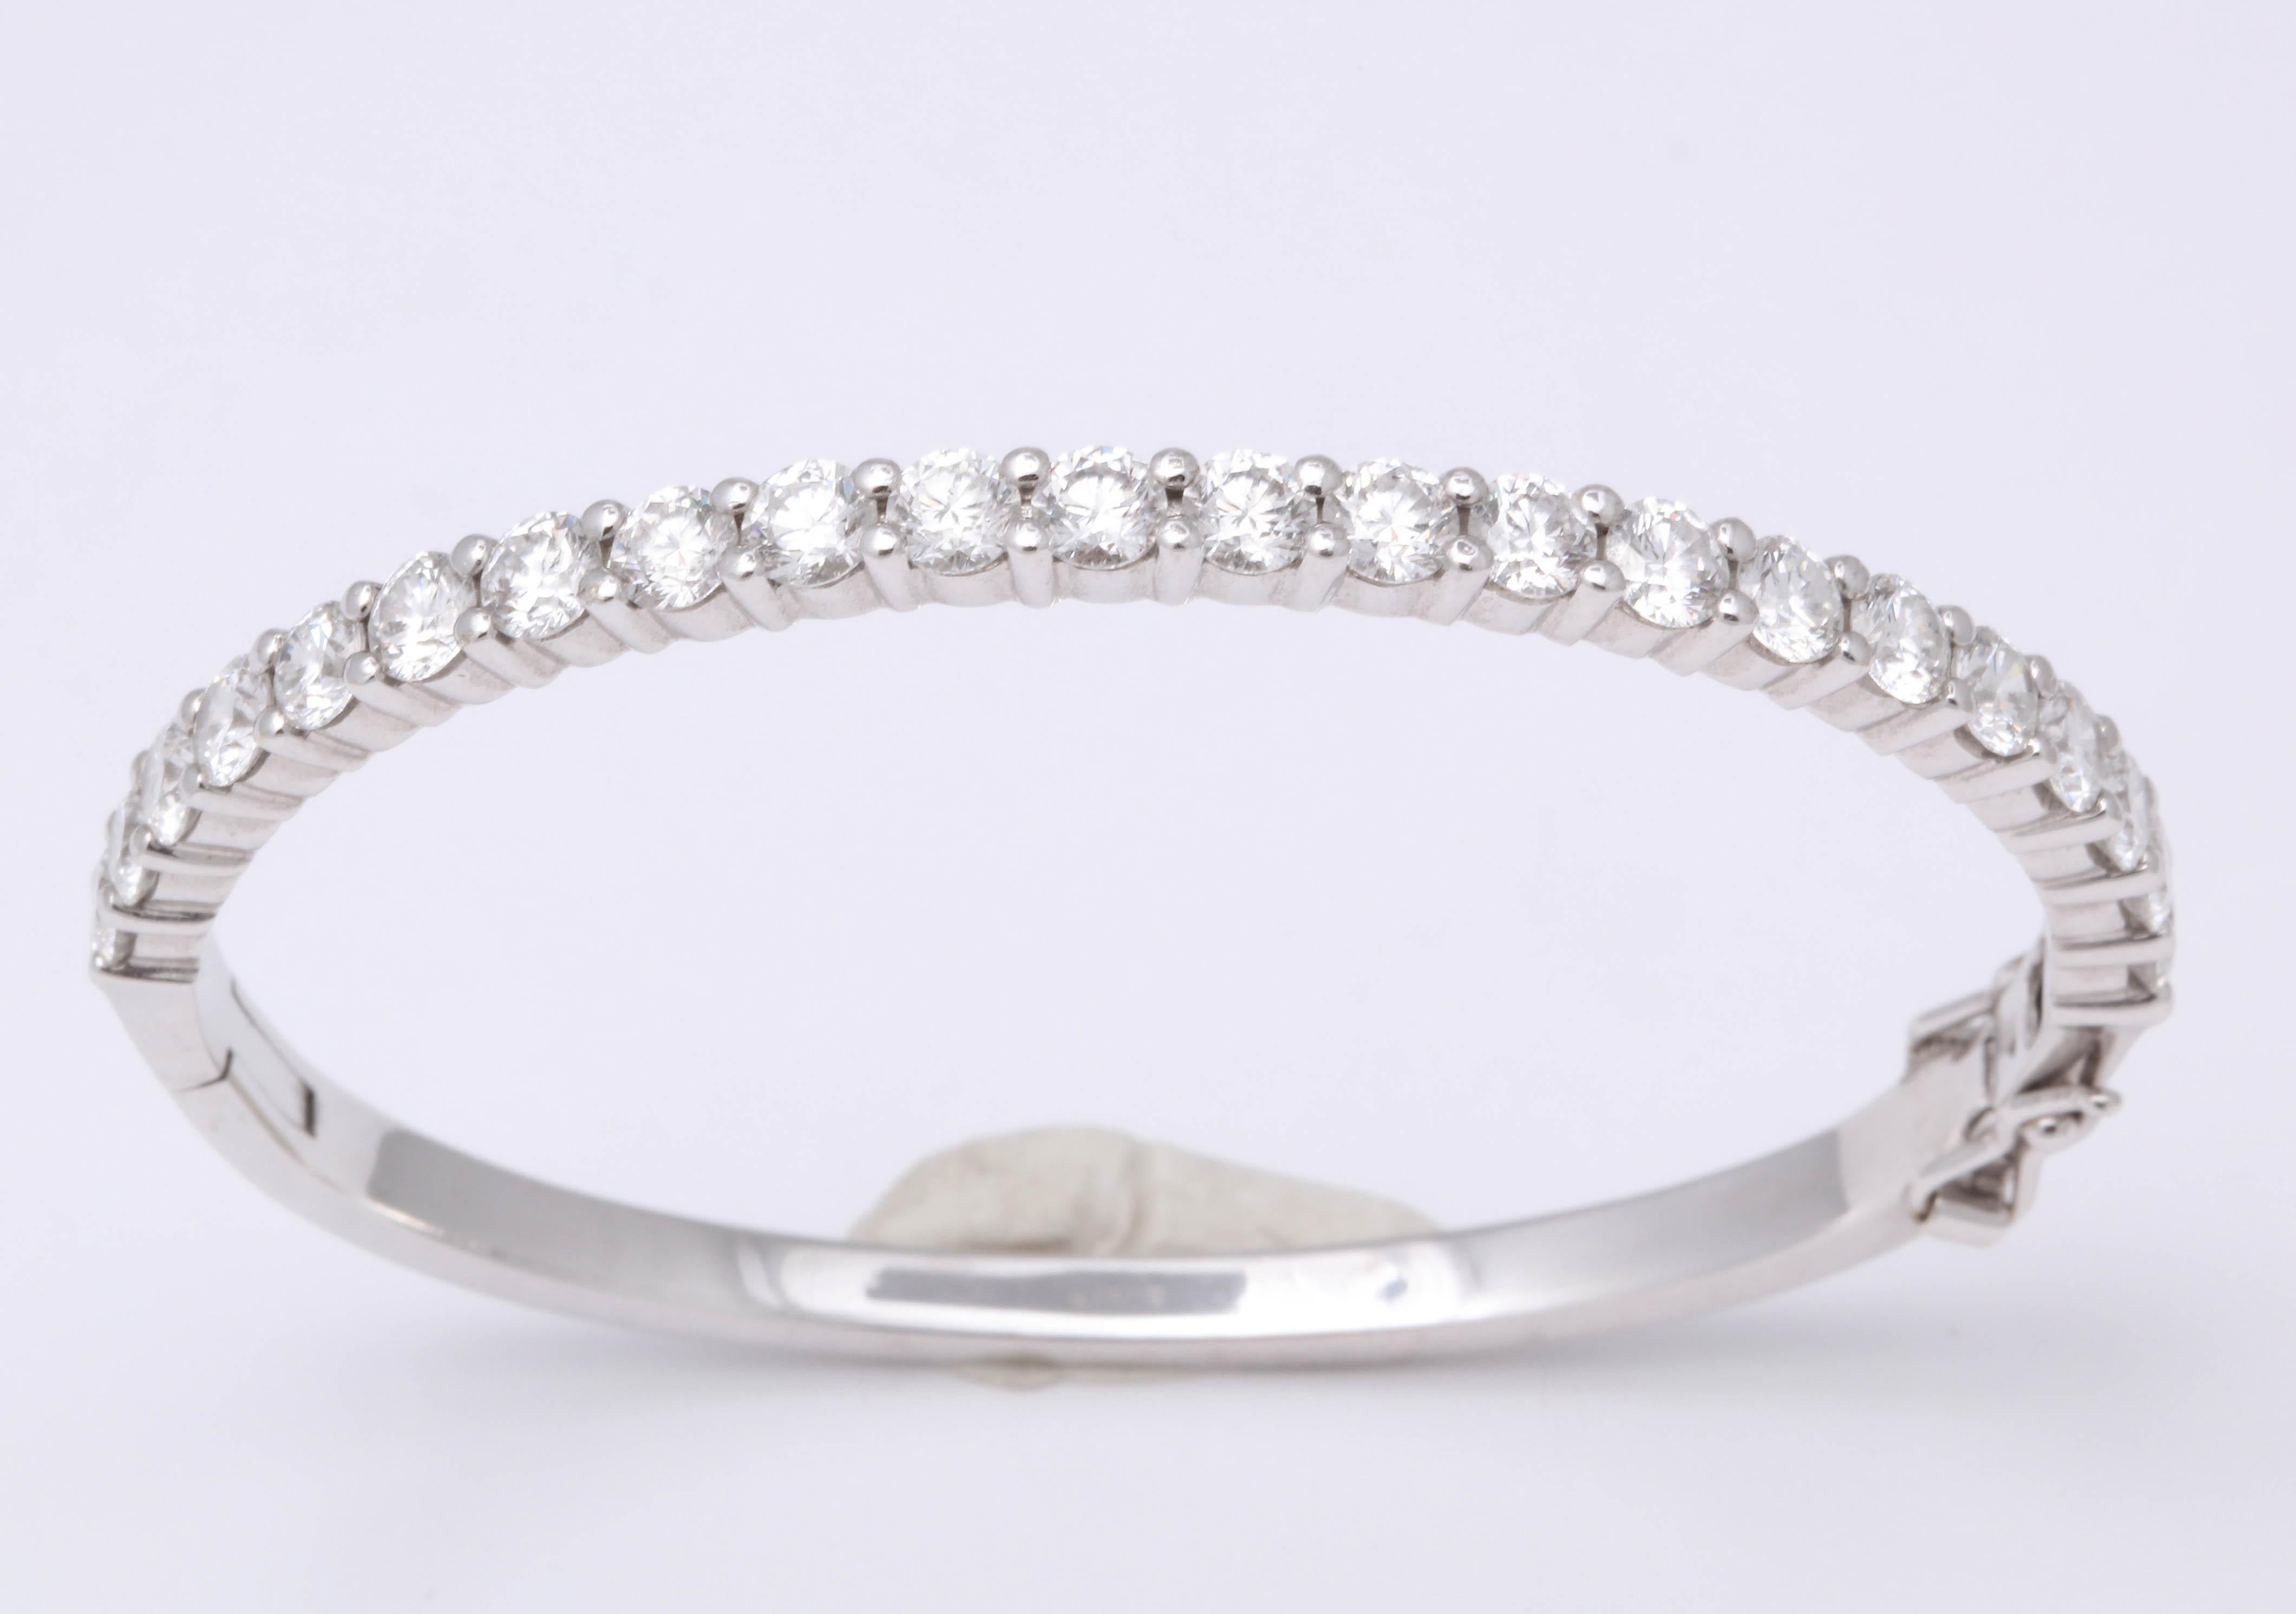 
An incredible diamond bangle!!

4.30 carats of white round brilliant cut diamonds set in white gold.

The diamonds are full of fire -- very brilliant. 

A gorgeous (and very wearable) bangle bracelet.

Makes a statement on its own but is also